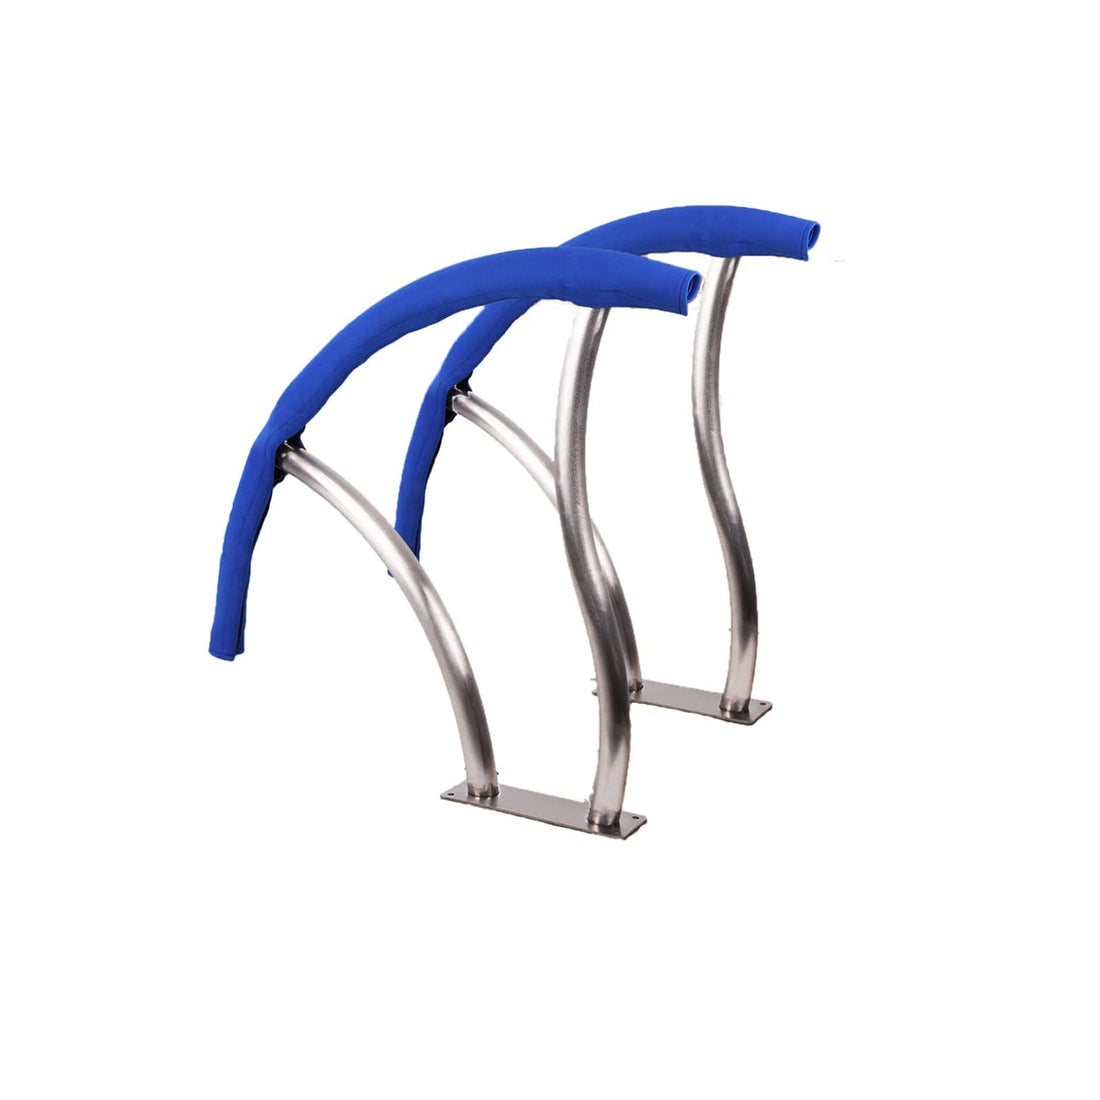 2pack 30x30 Inch Pool Handrail 250LBS Load for Inground Pool